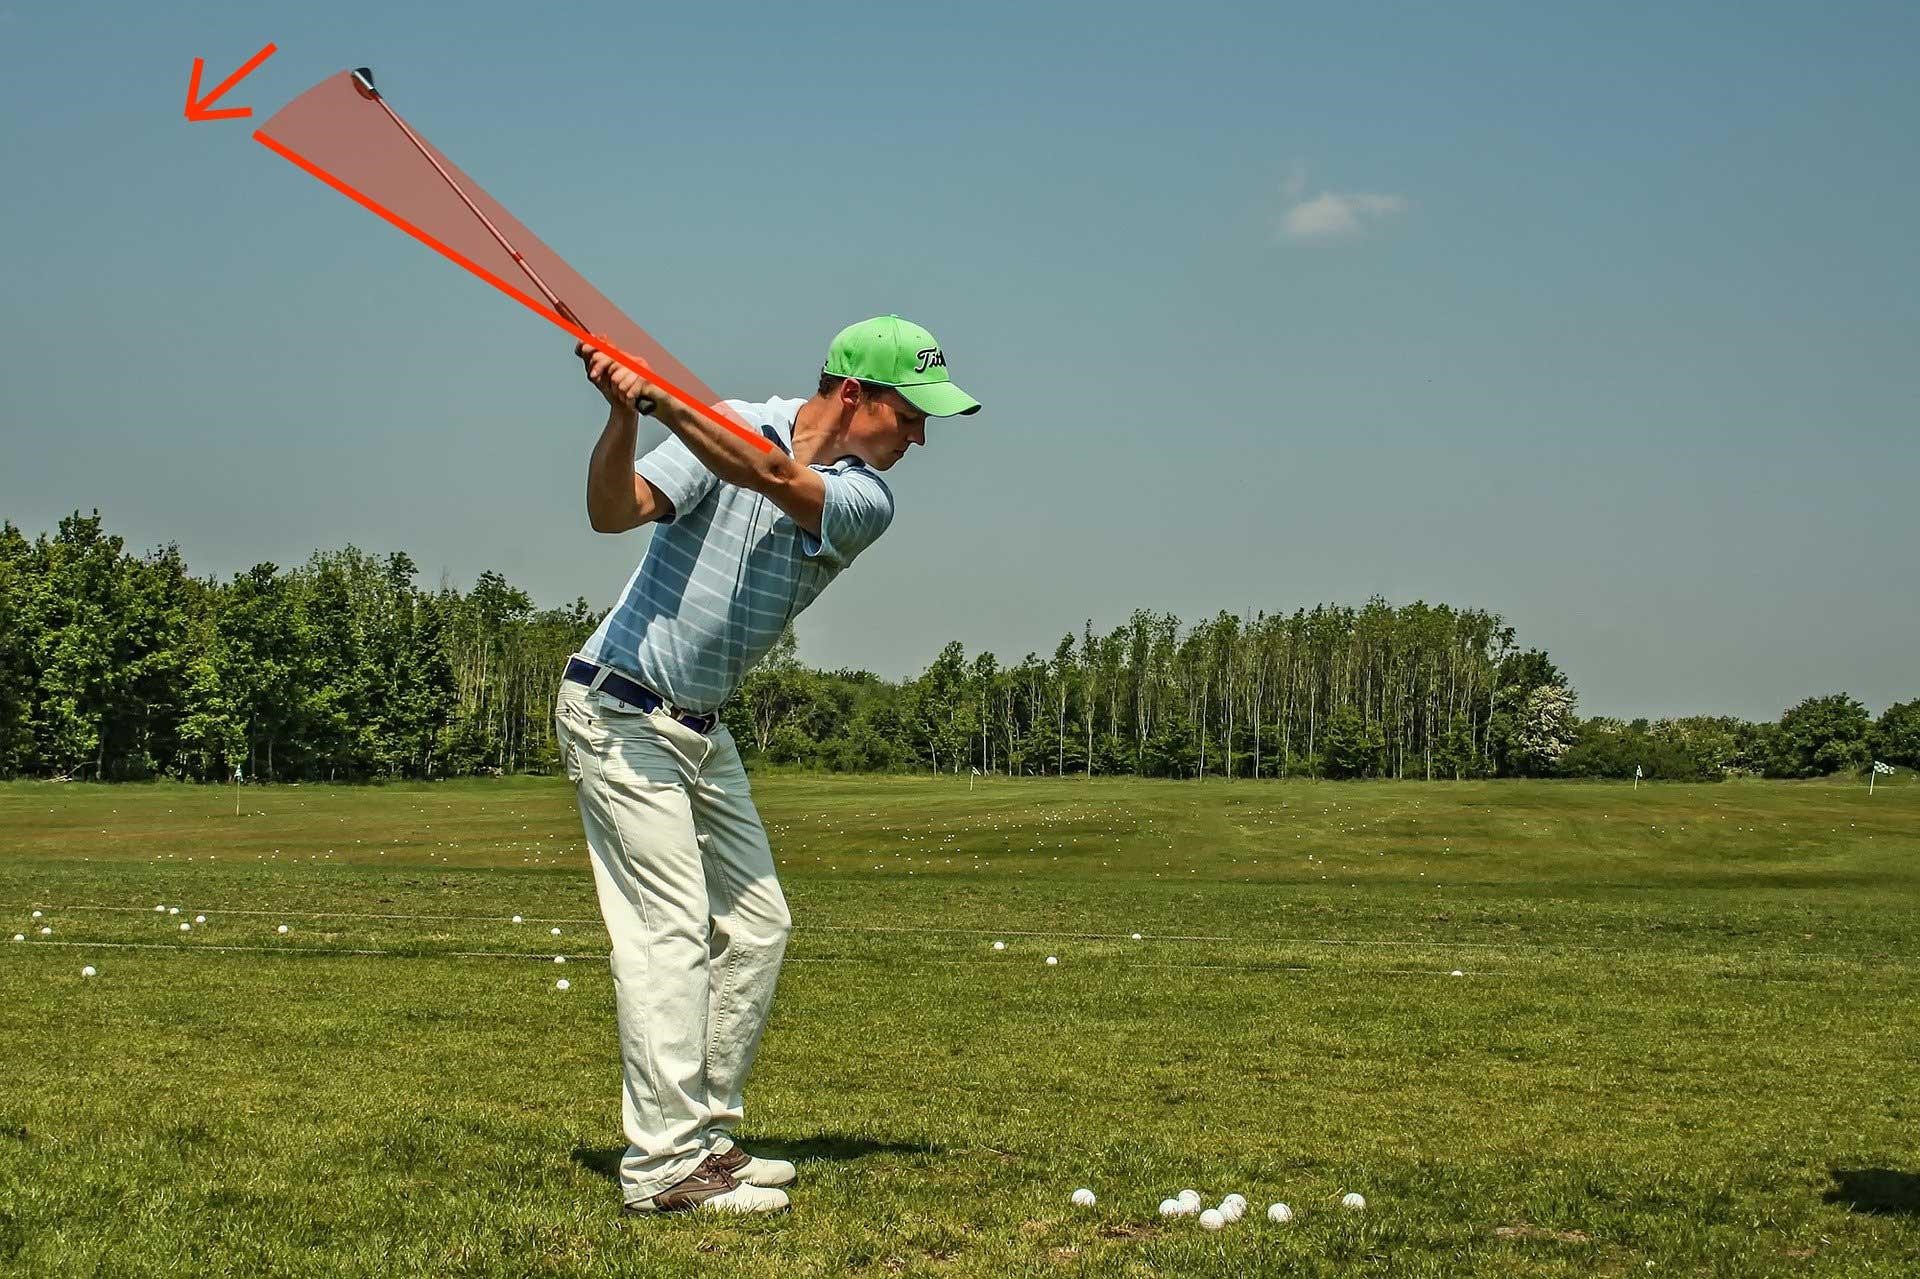 a player with a shallow golf swing